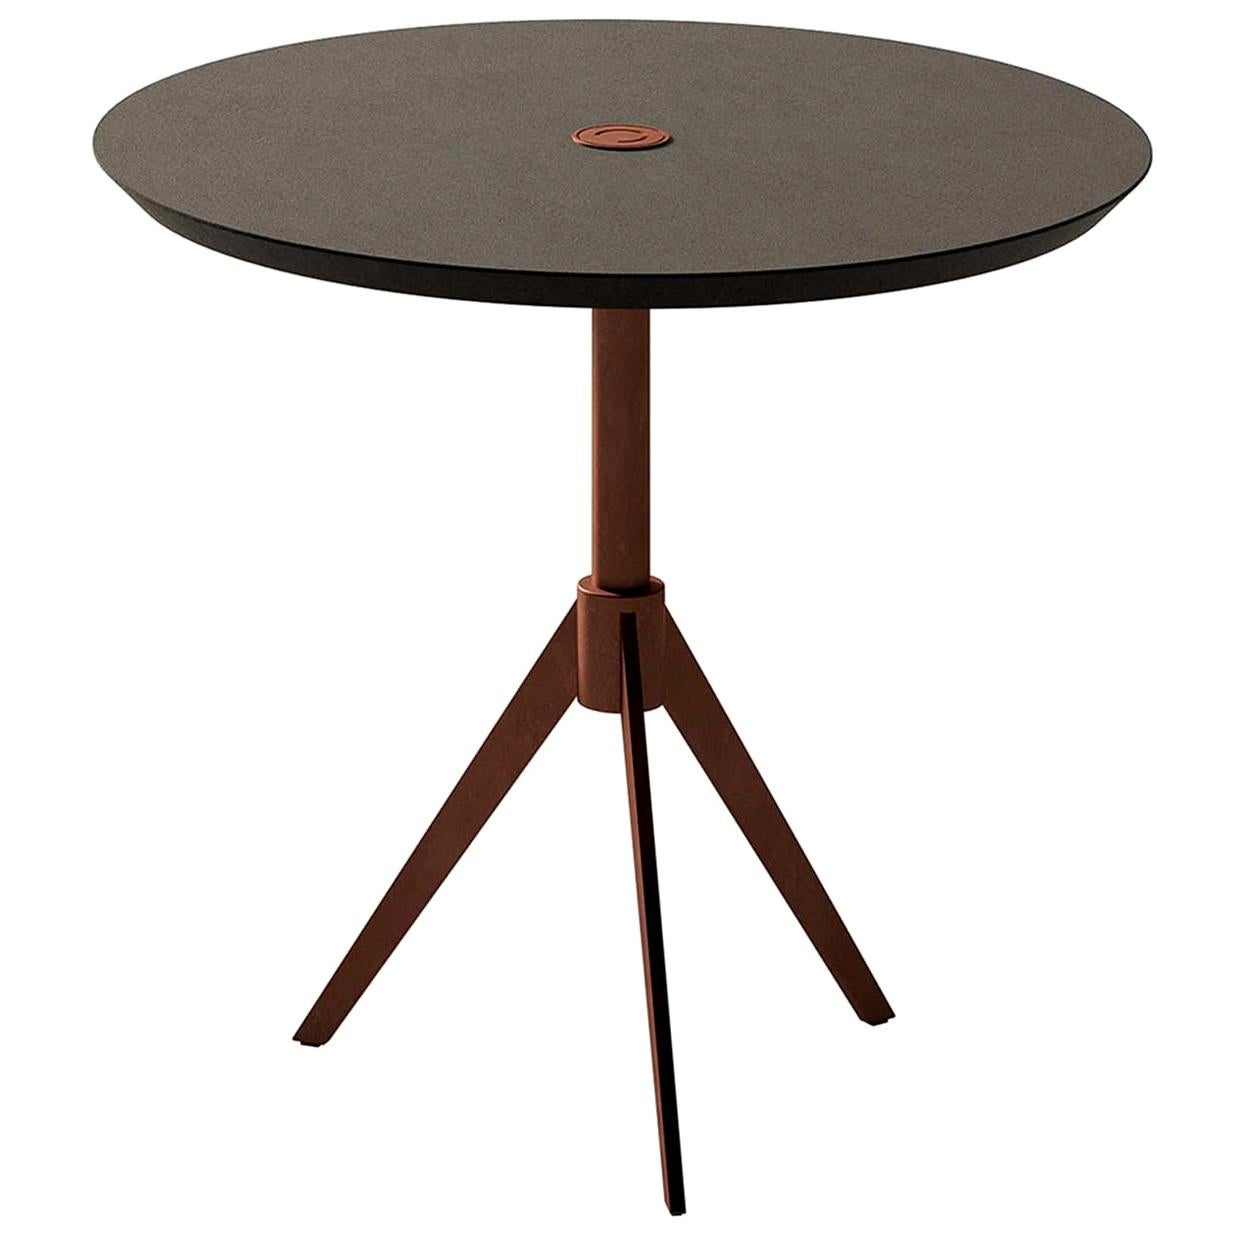 Medium Round Coffee Table For Sale